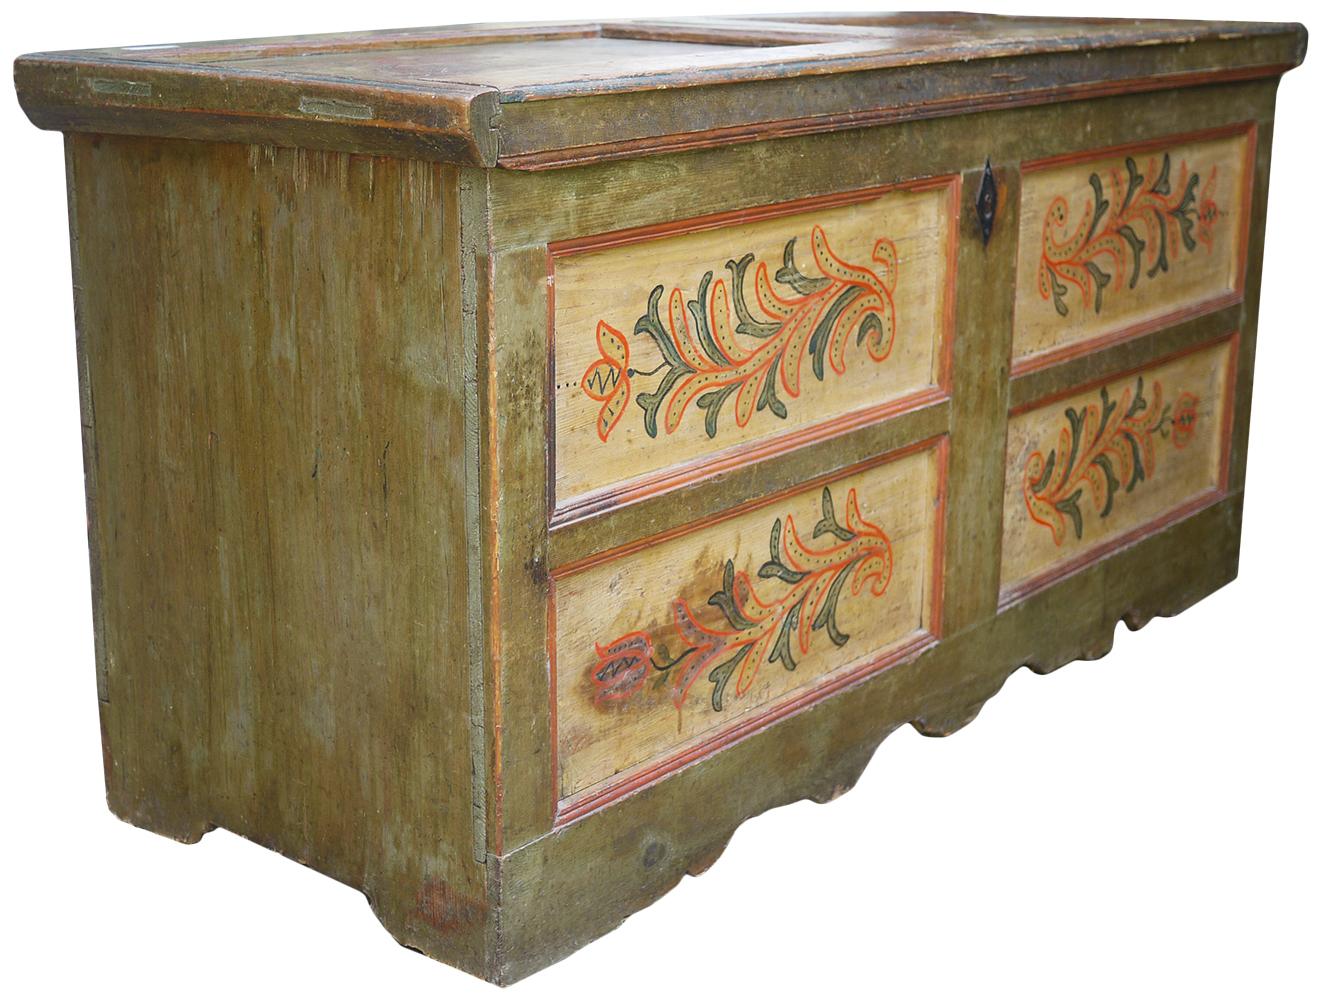 Large chest, Northern Italy

Measures: H 89 cm, L 176 cm, P 65 cm

Large chest in fir wood, entirely painted in forest green color. On the front, four framed mirrors are decorated with stylized floral motifs. The lower part is shaped to refine